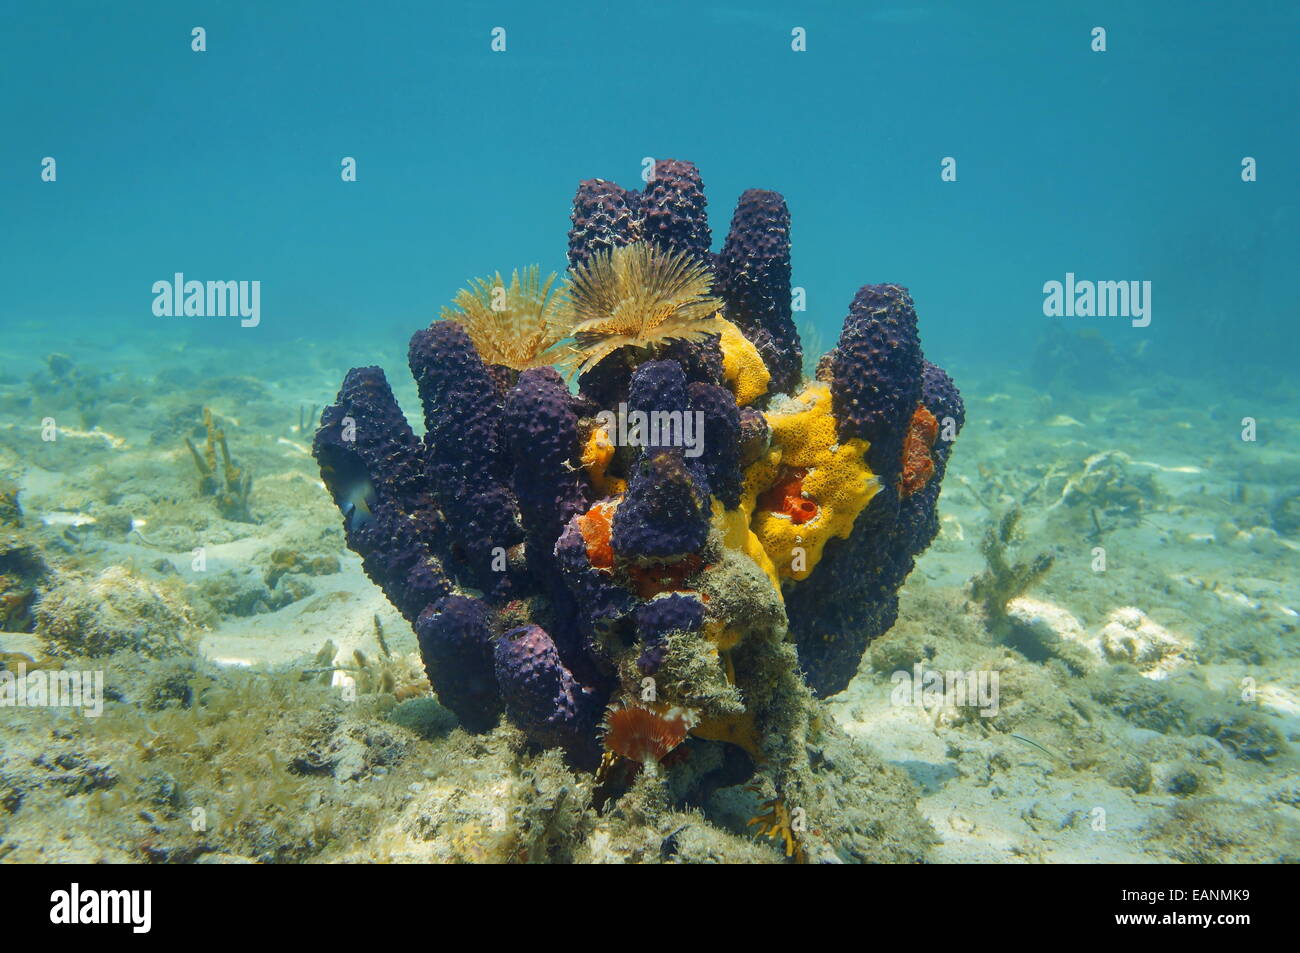 Colorful underwater creatures with sea sponges and feather duster worms, Caribbean sea Stock Photo